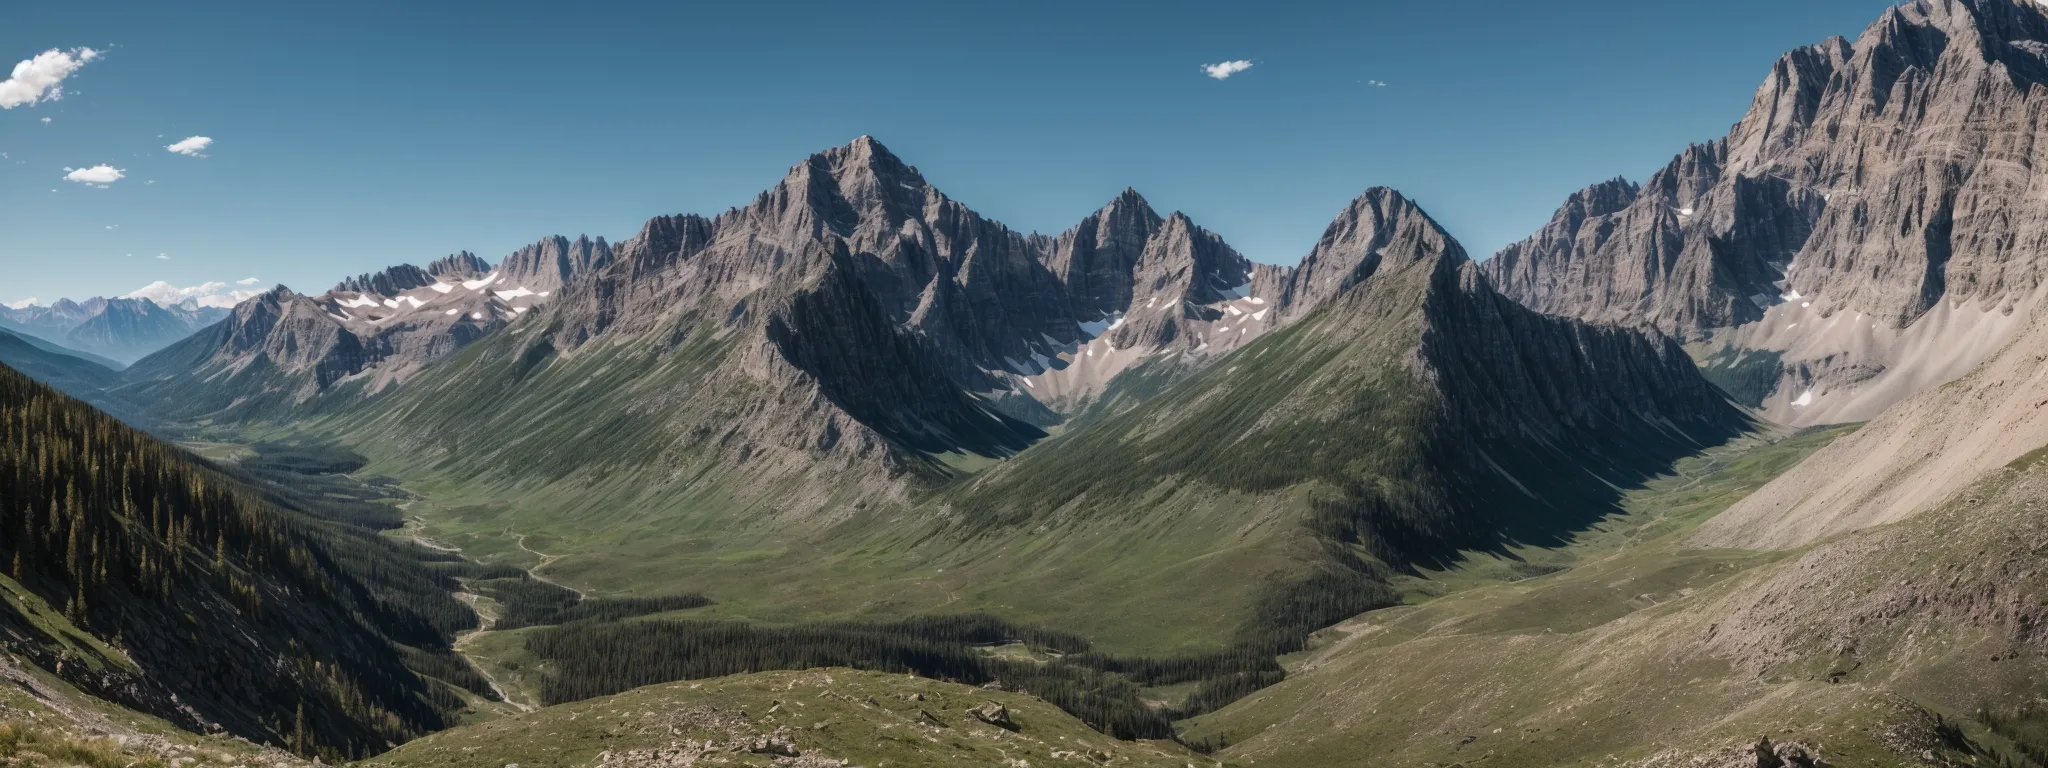 a panoramic view of the rocky mountains under a vibrant blue sky.